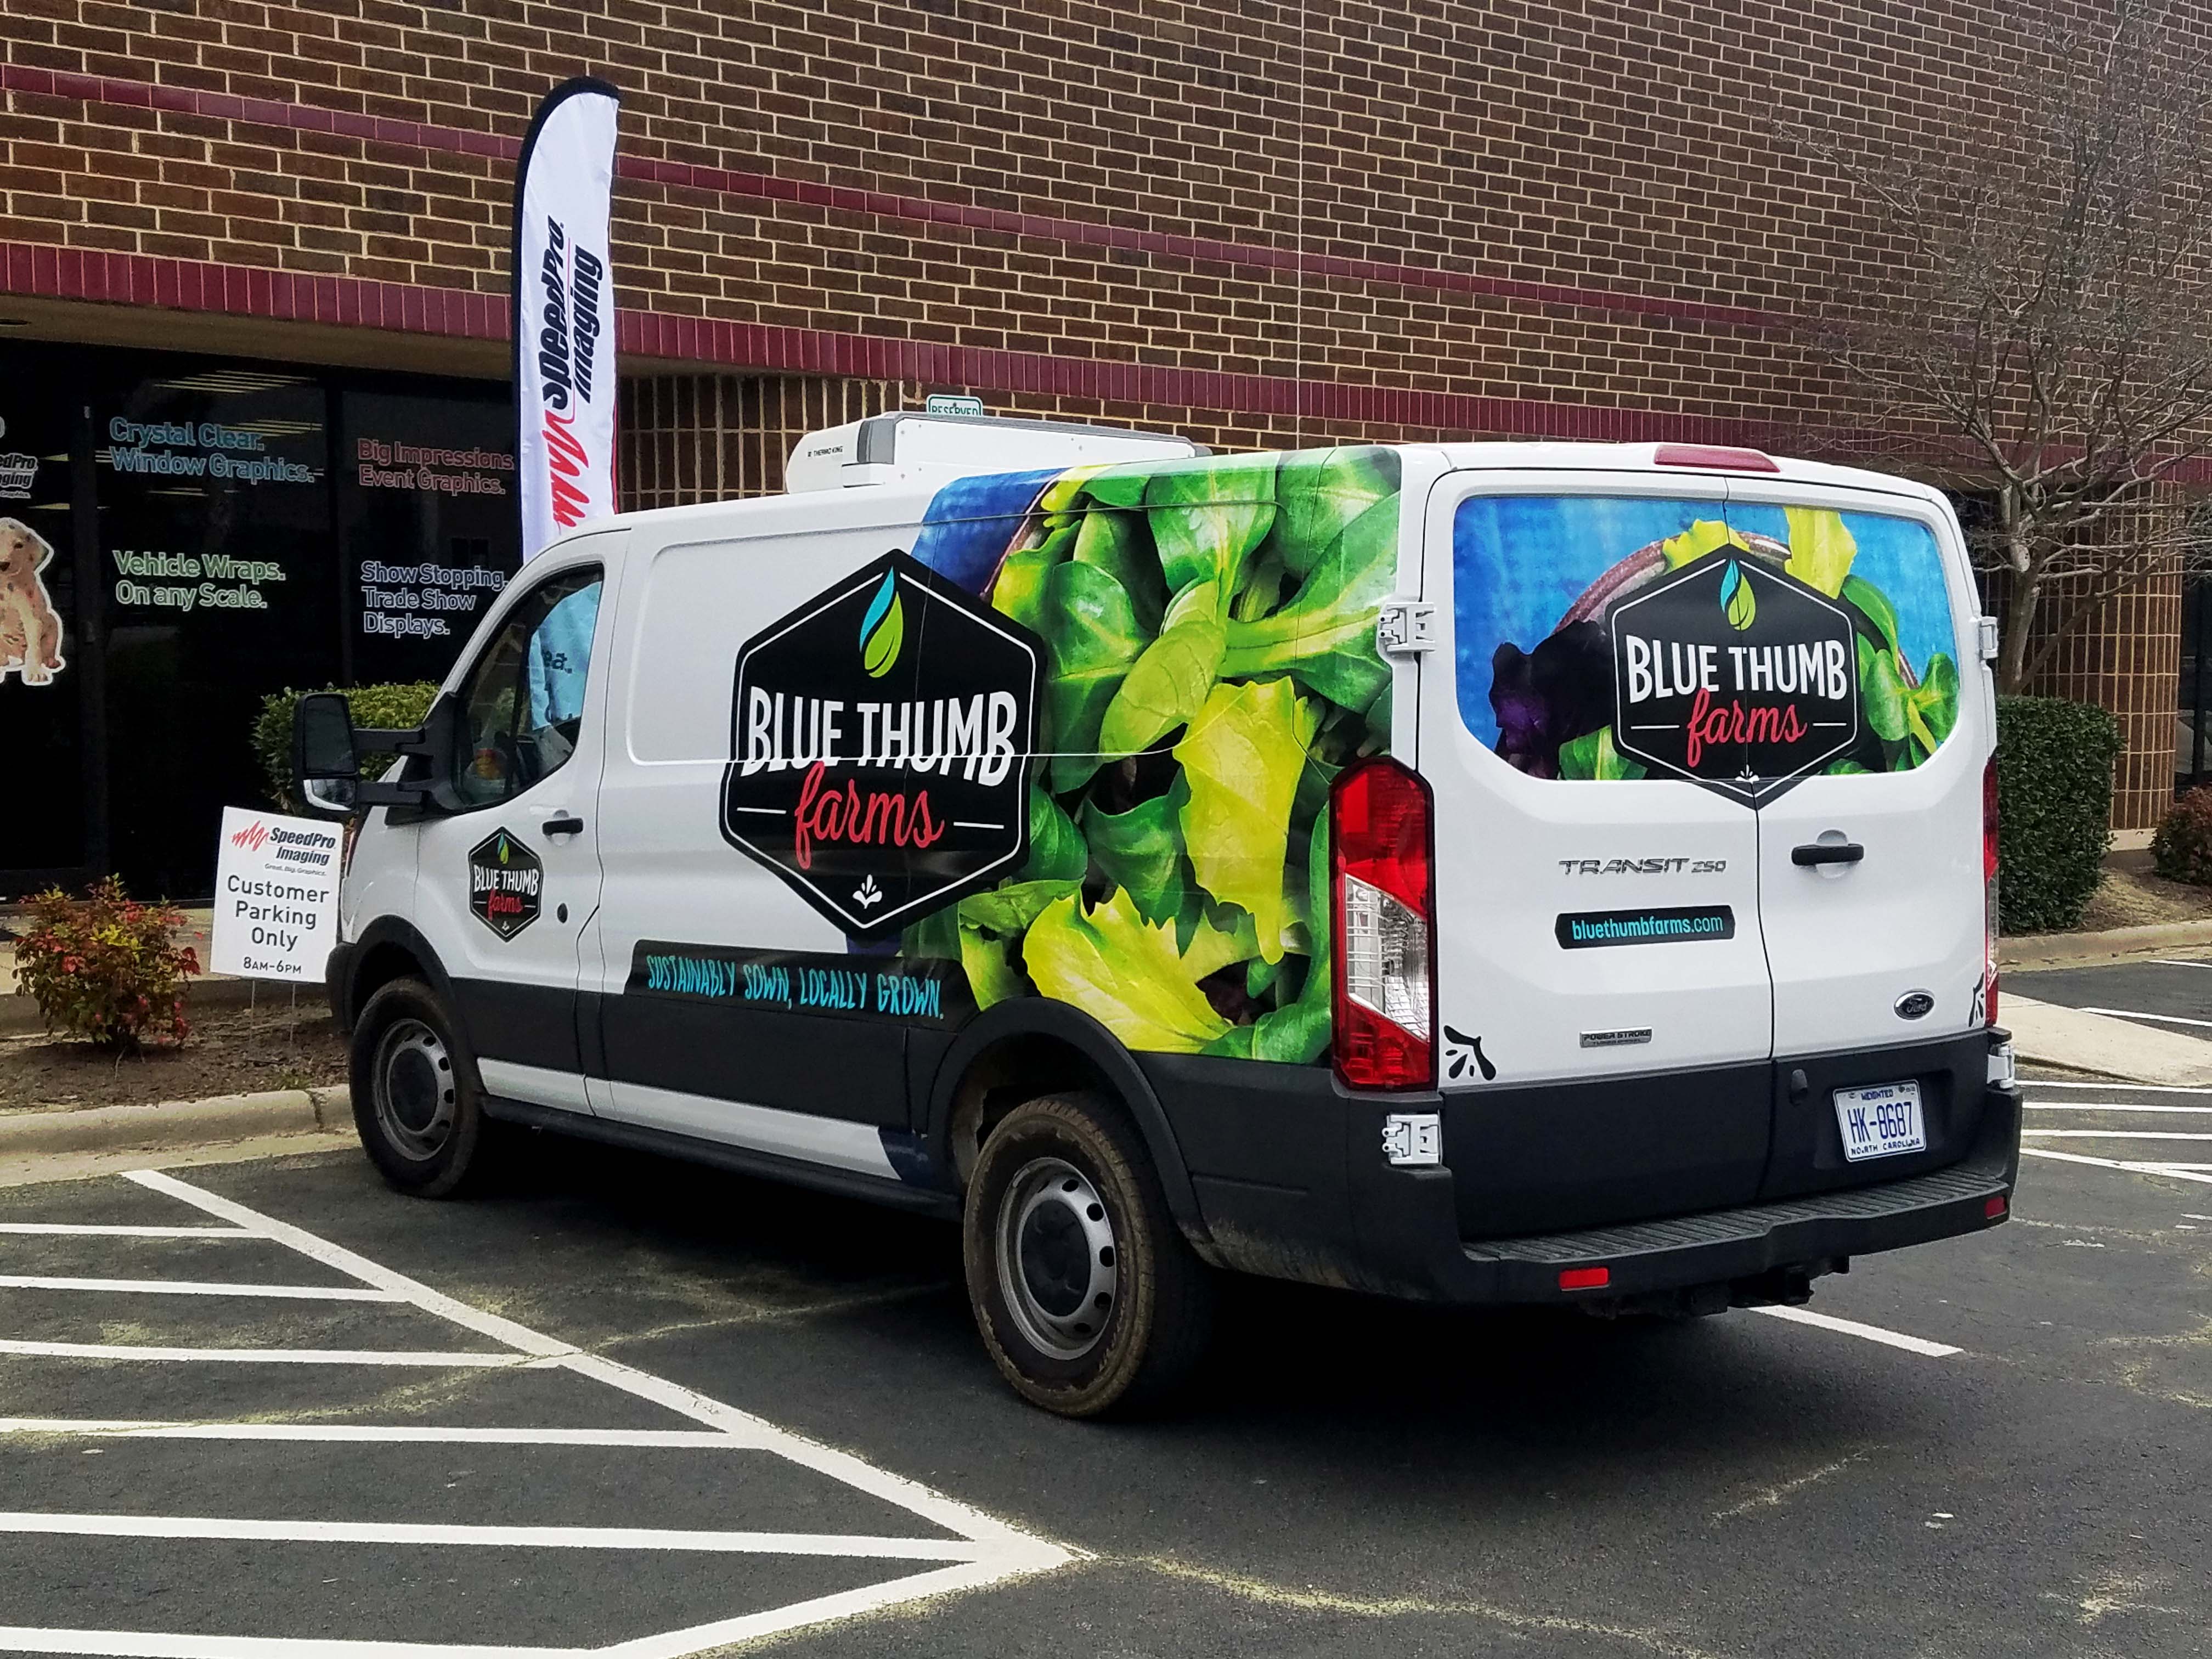 A Ford Transit van with a custom designed vehicle wrap for Blue Thumb Farms in Zebulon, NC